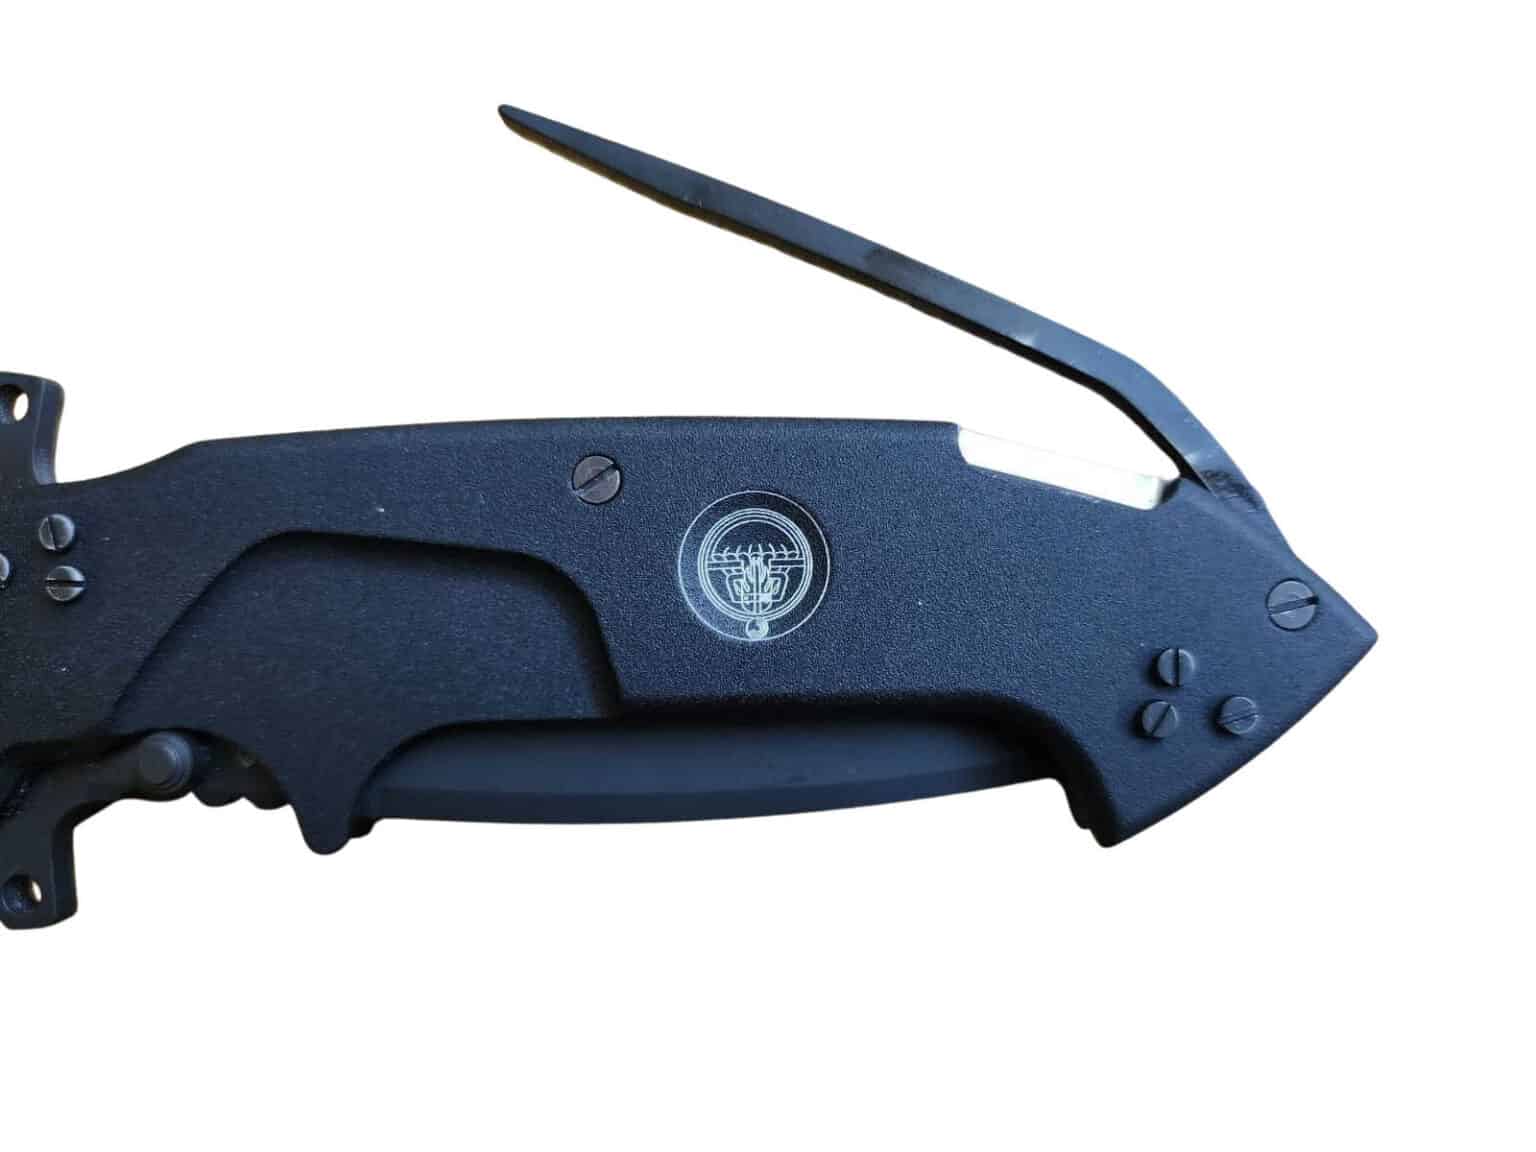 What is a Glauca Knife? (Extrema Ratio Glauca B1 Review)